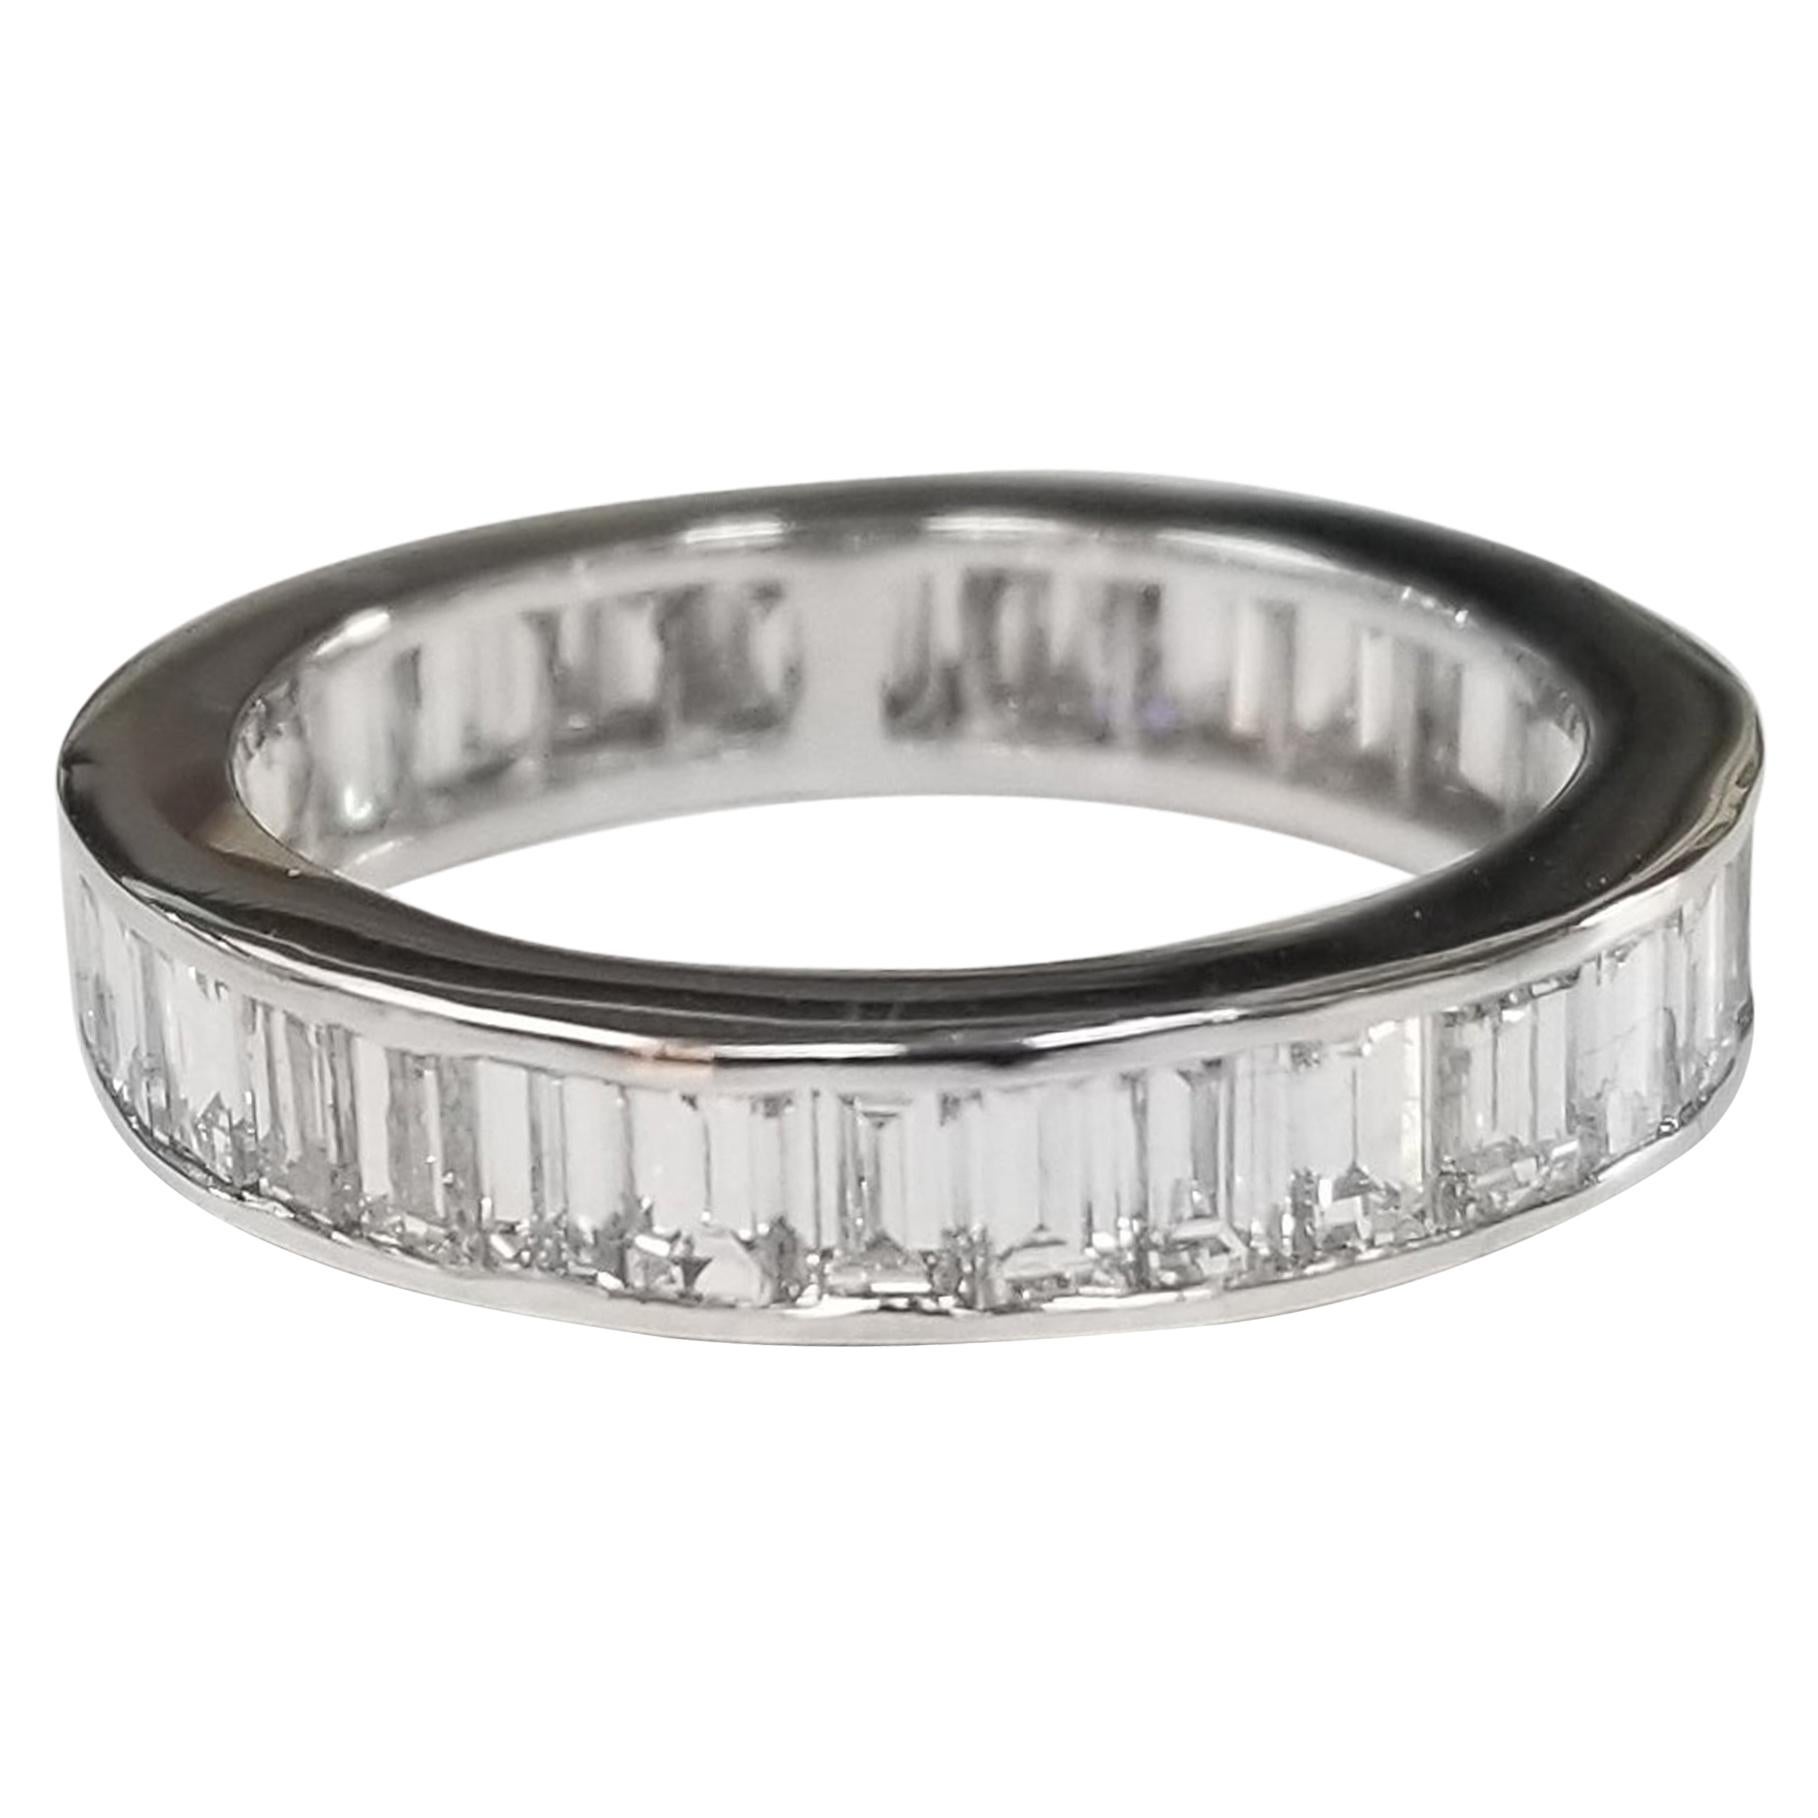 14 Karat White Gold Baguette Channel Eternity Ring with 3.25 Carat